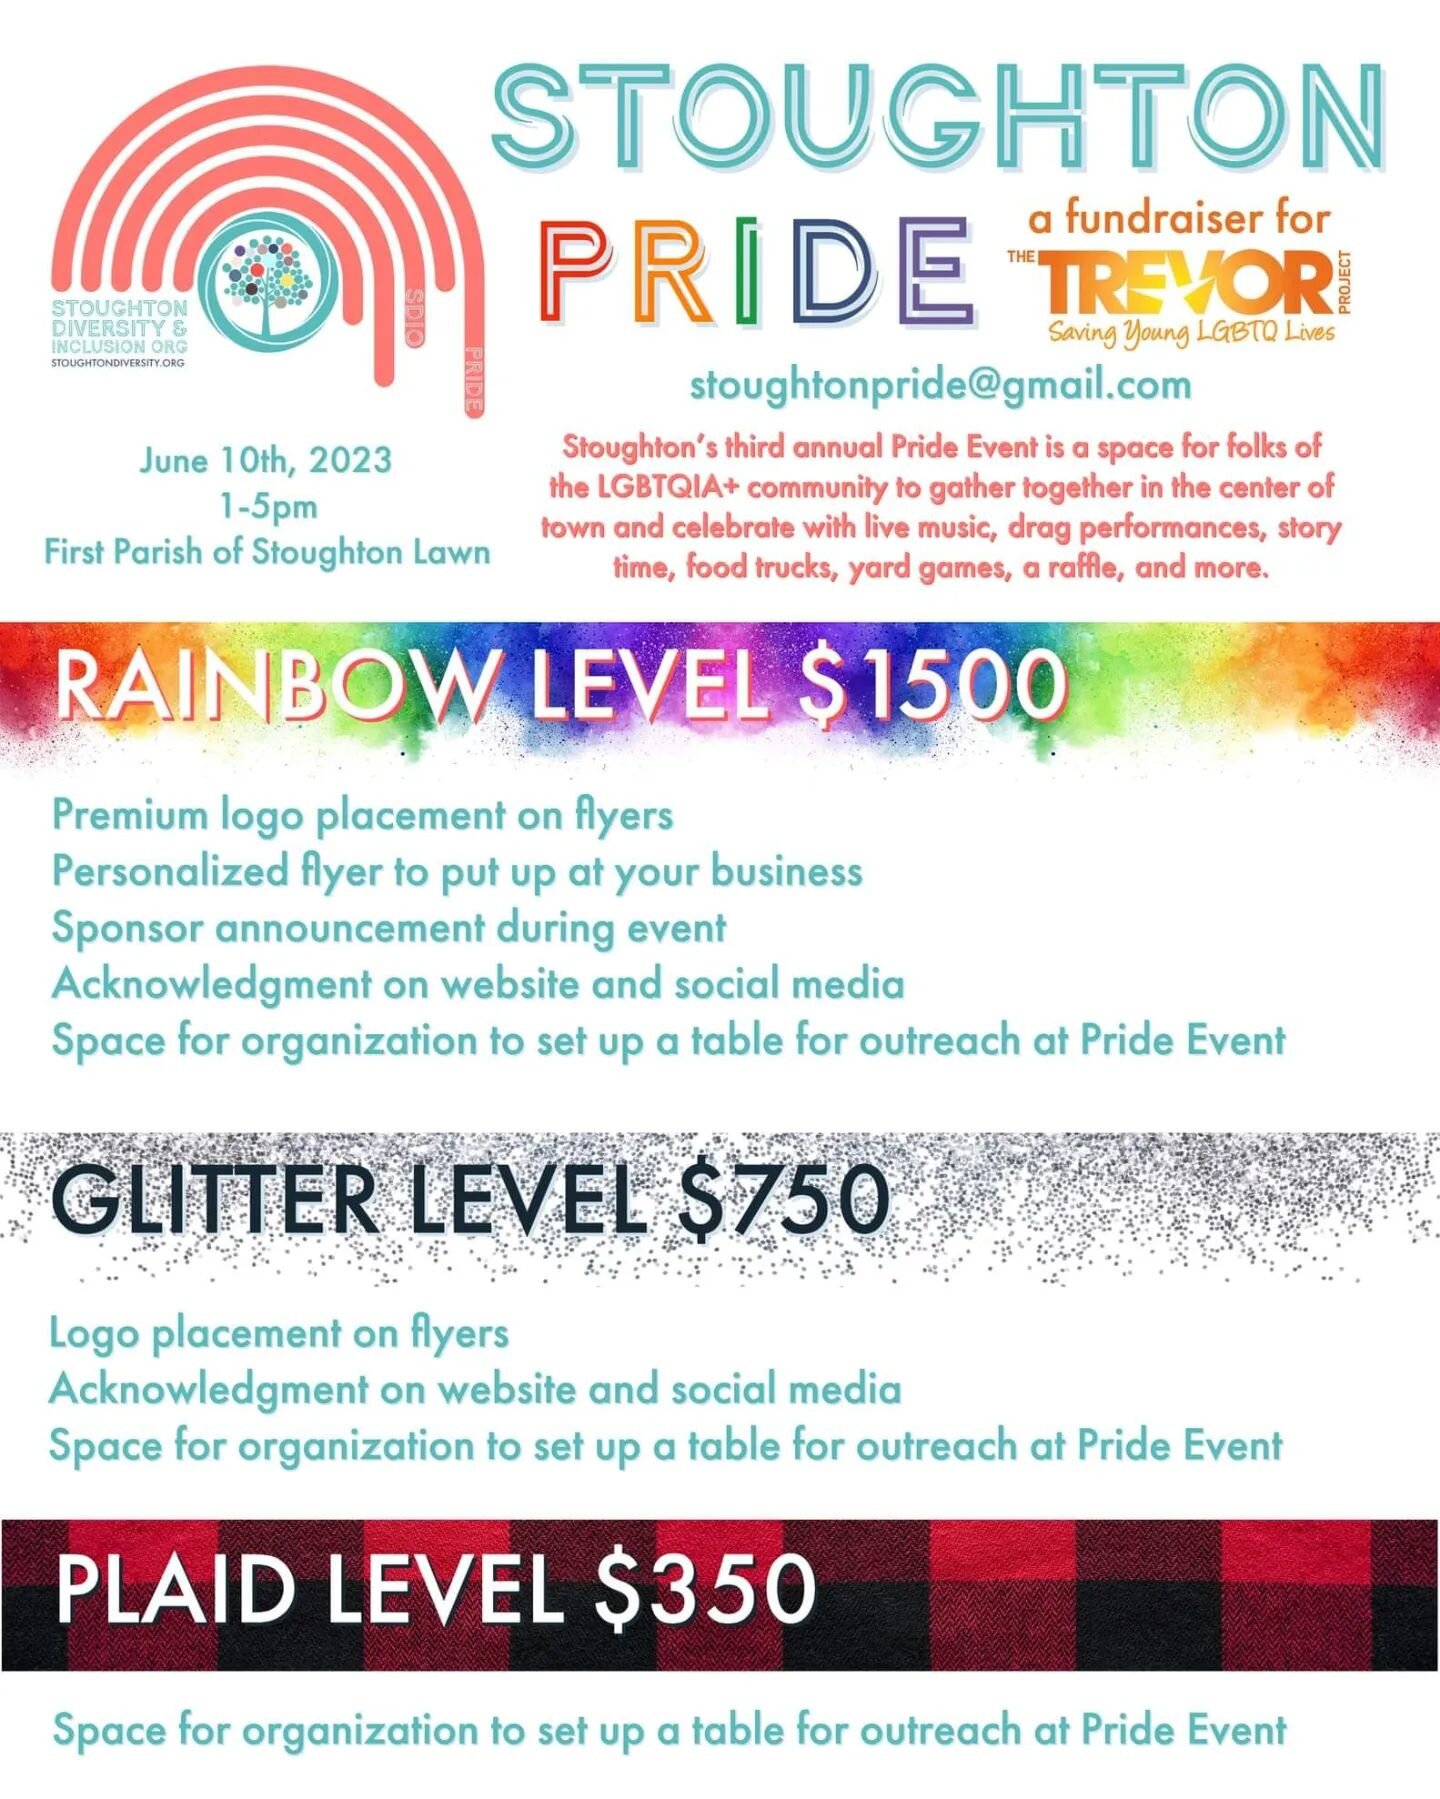 Planning for the Third Annual Stoughton Pride is underway and we are looking for sponsors!

Your sponsorship goes towards making this whole thing happen and helps us expand our event each year to include a wider variety of performances and events. We